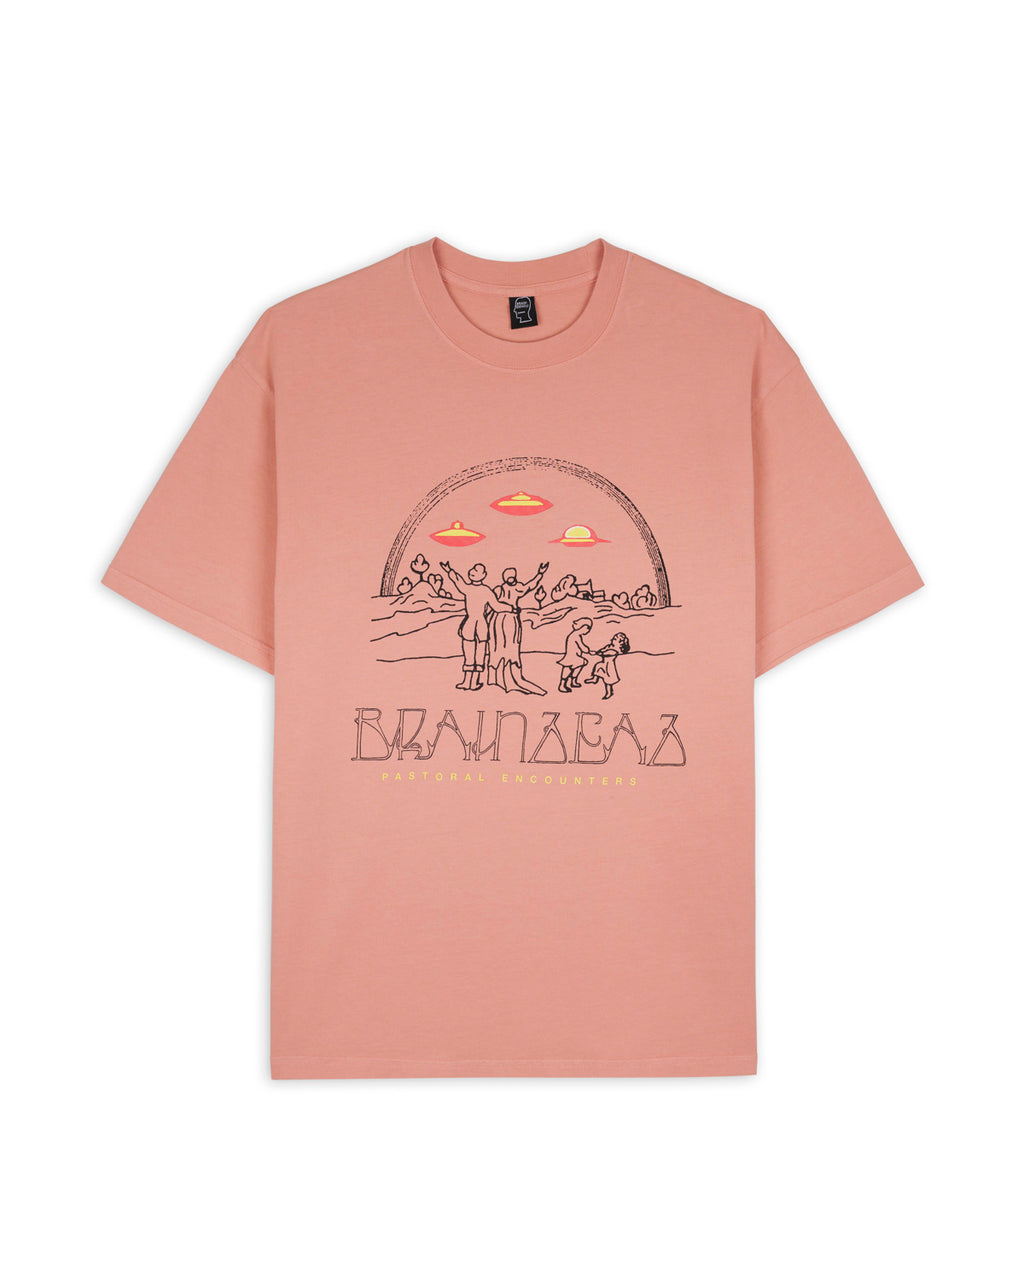 Pastoral Encounters T-shirt - Dusty Rose 1